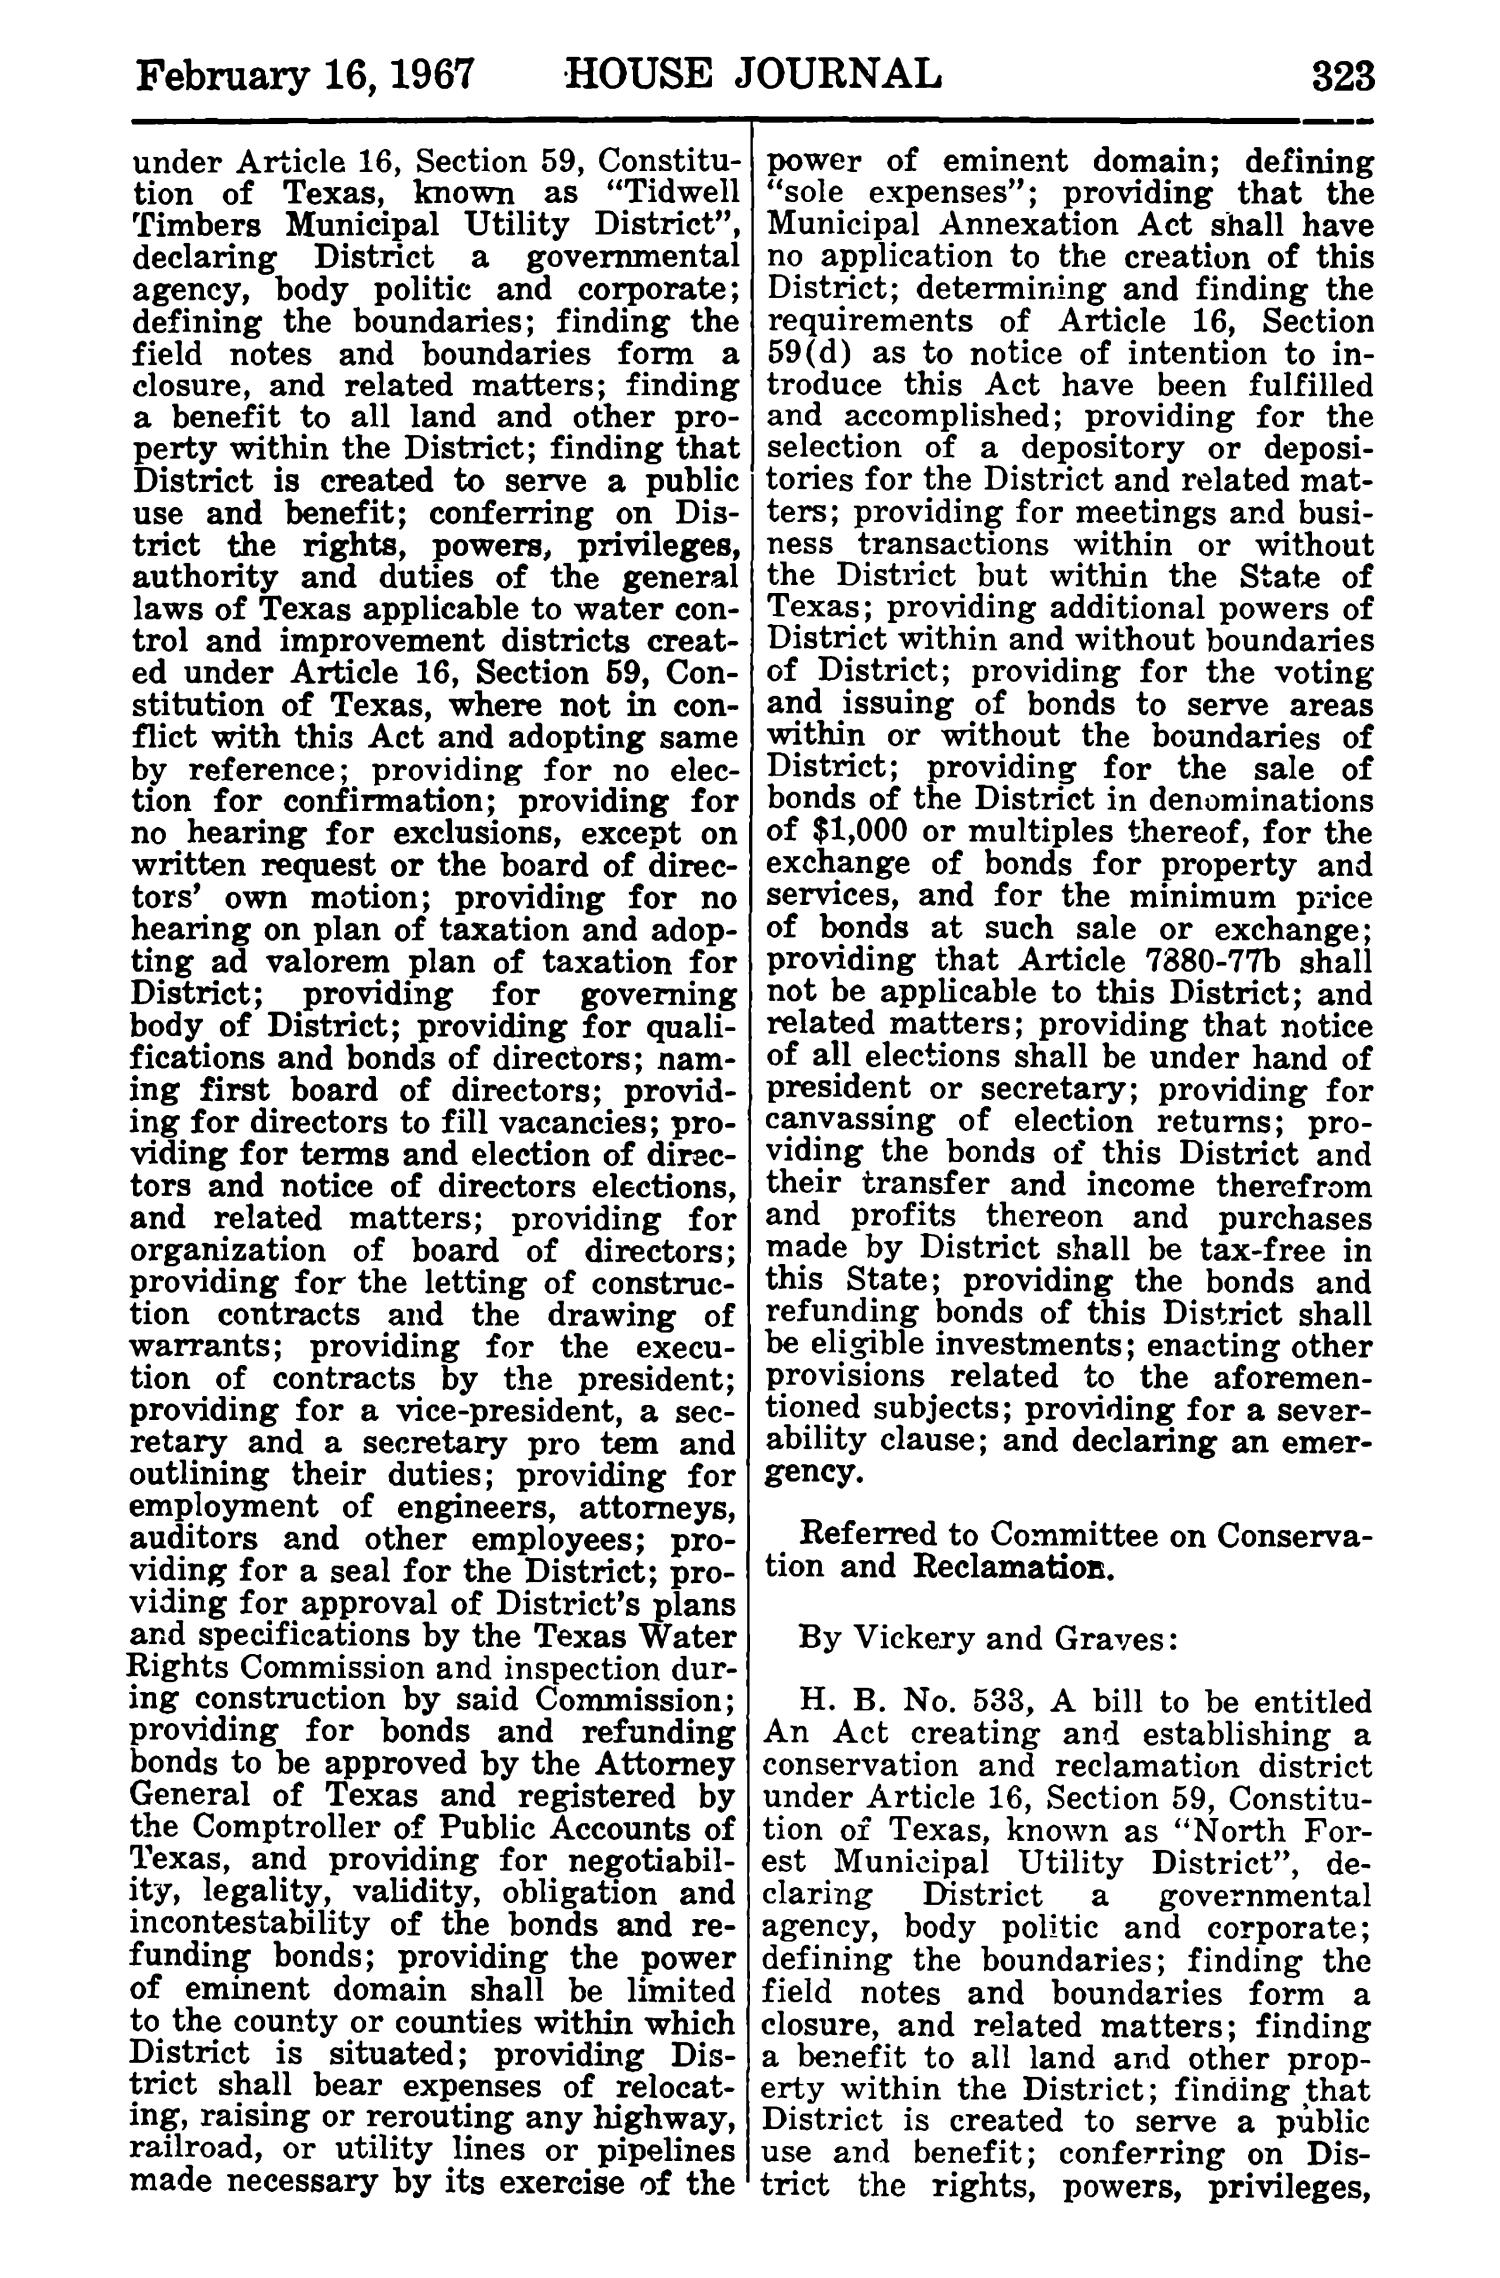 Journal of the House of Representatives of the Regular Session of the Sixtieth Legislature of the State of Texas, Volume 1
                                                
                                                    323
                                                